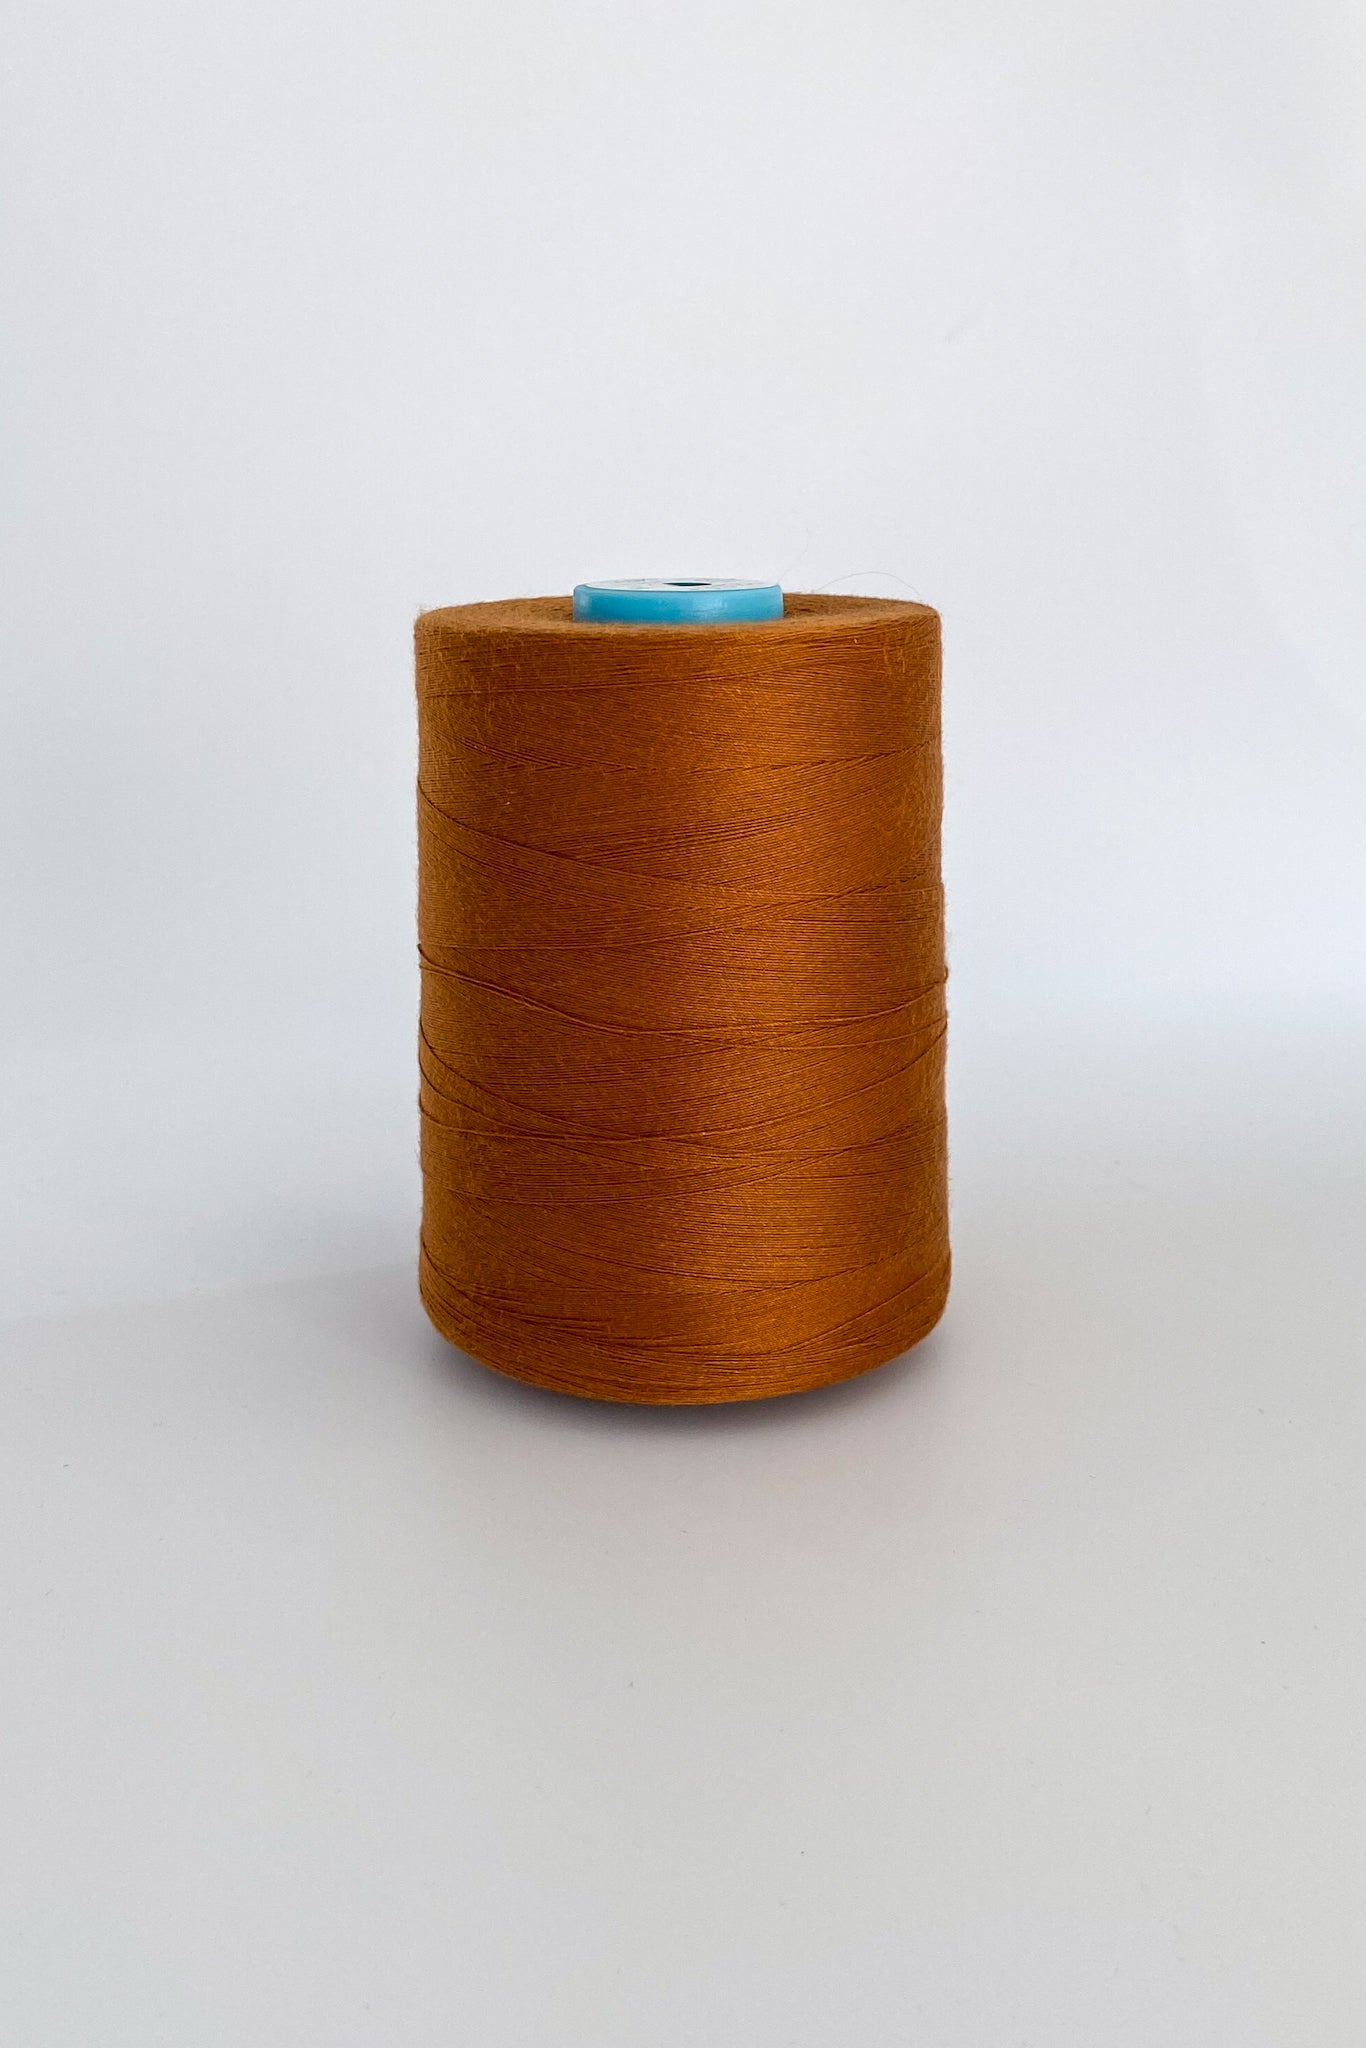 Spool of crafil tencel sewing thread in bronze on white background